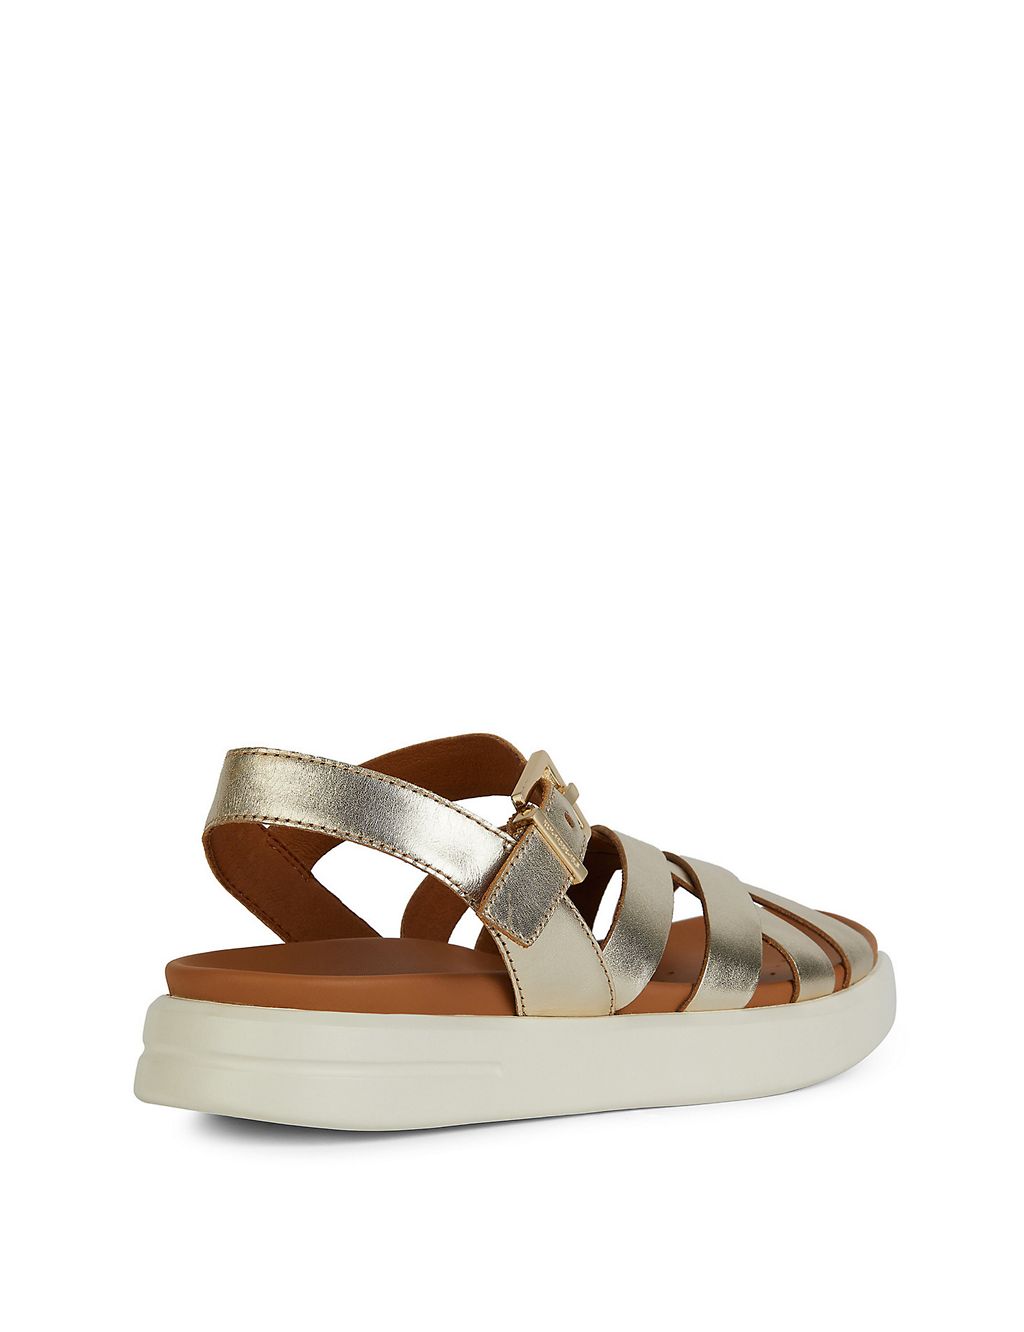 Leather Metallic Ankle Strap Flat Sandals 4 of 6